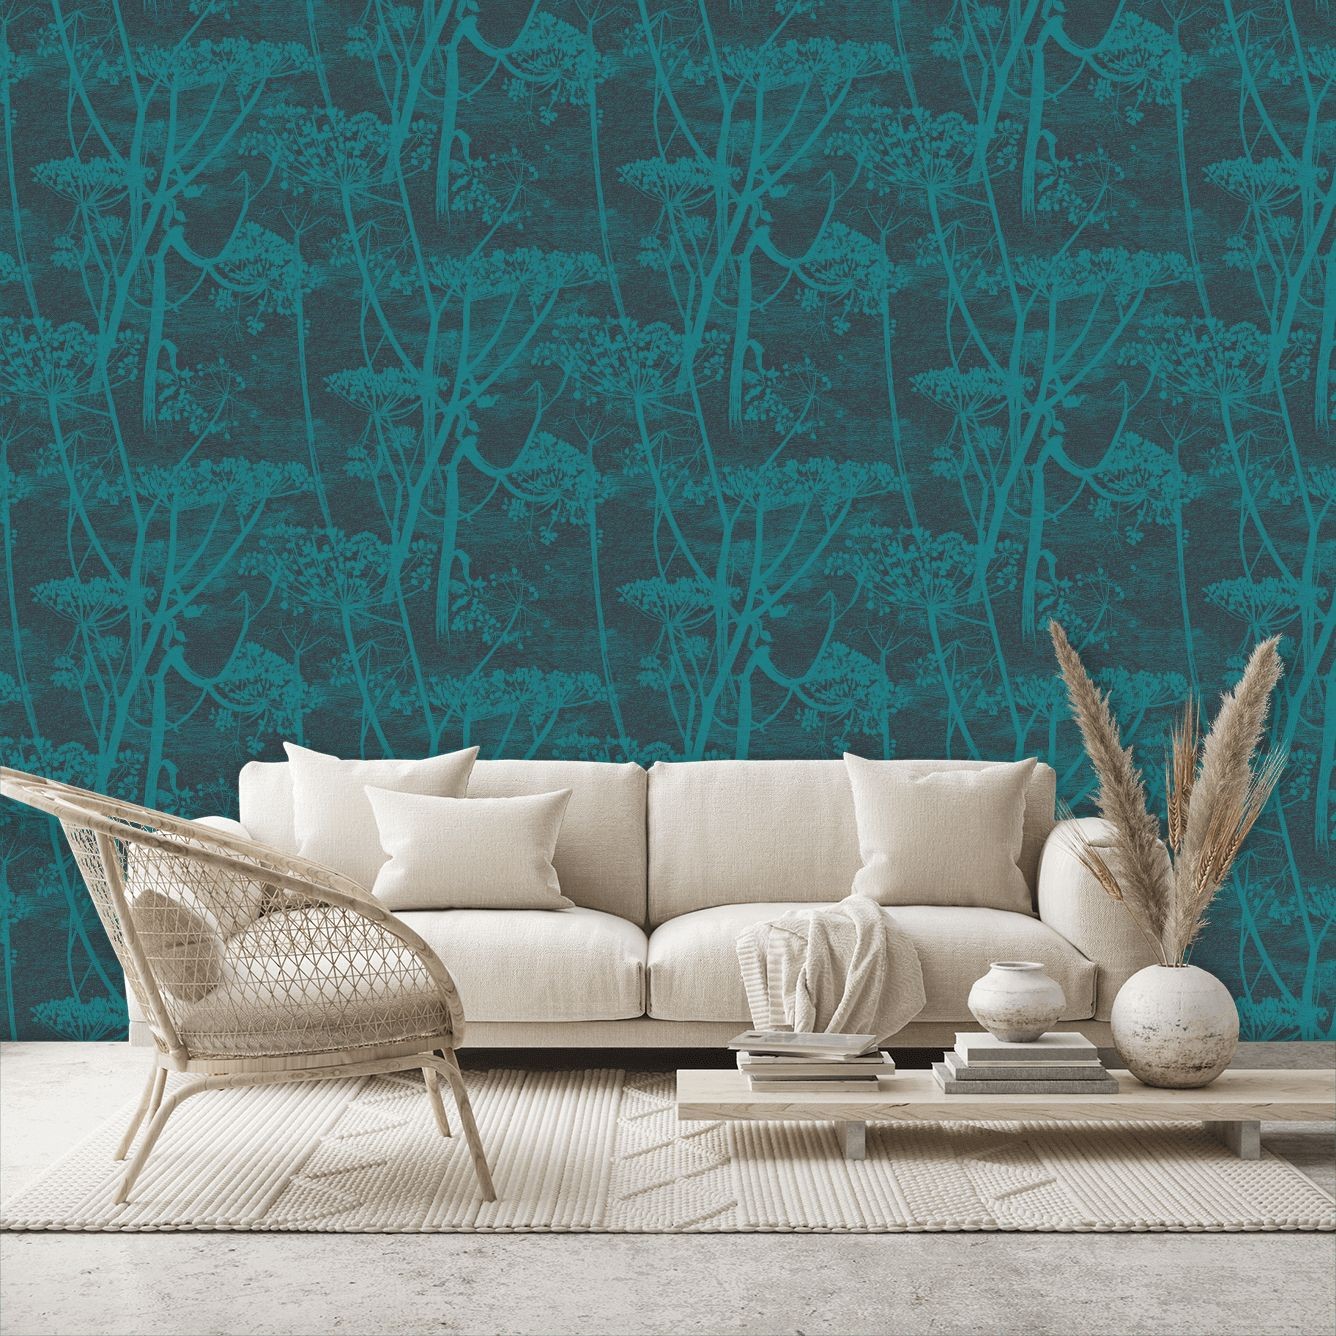 Cow Parsley Wallcovering by Cole amp Son Cole amp Son Designer  Wallcoverings amp Fabrics  Amersham Designs Cole amp Son Designer  Wallcoverings amp Fabrics